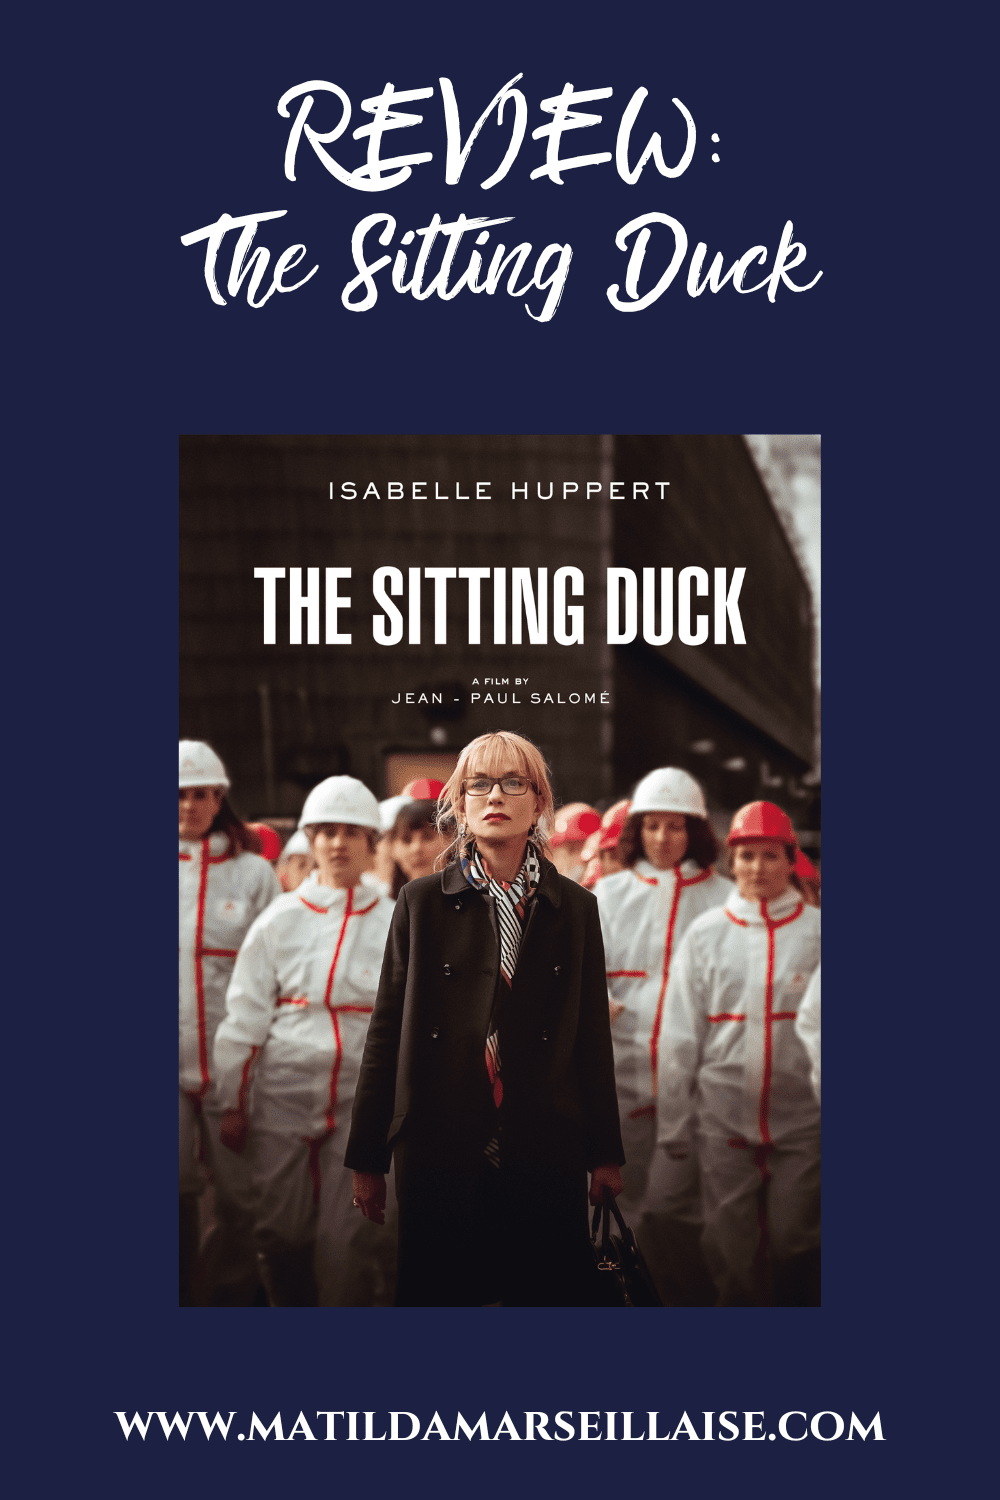 Isabelle Huppert stars as a union rep dealing with the fallout of threatening to expose dodgy dealings in The Sitting Duck